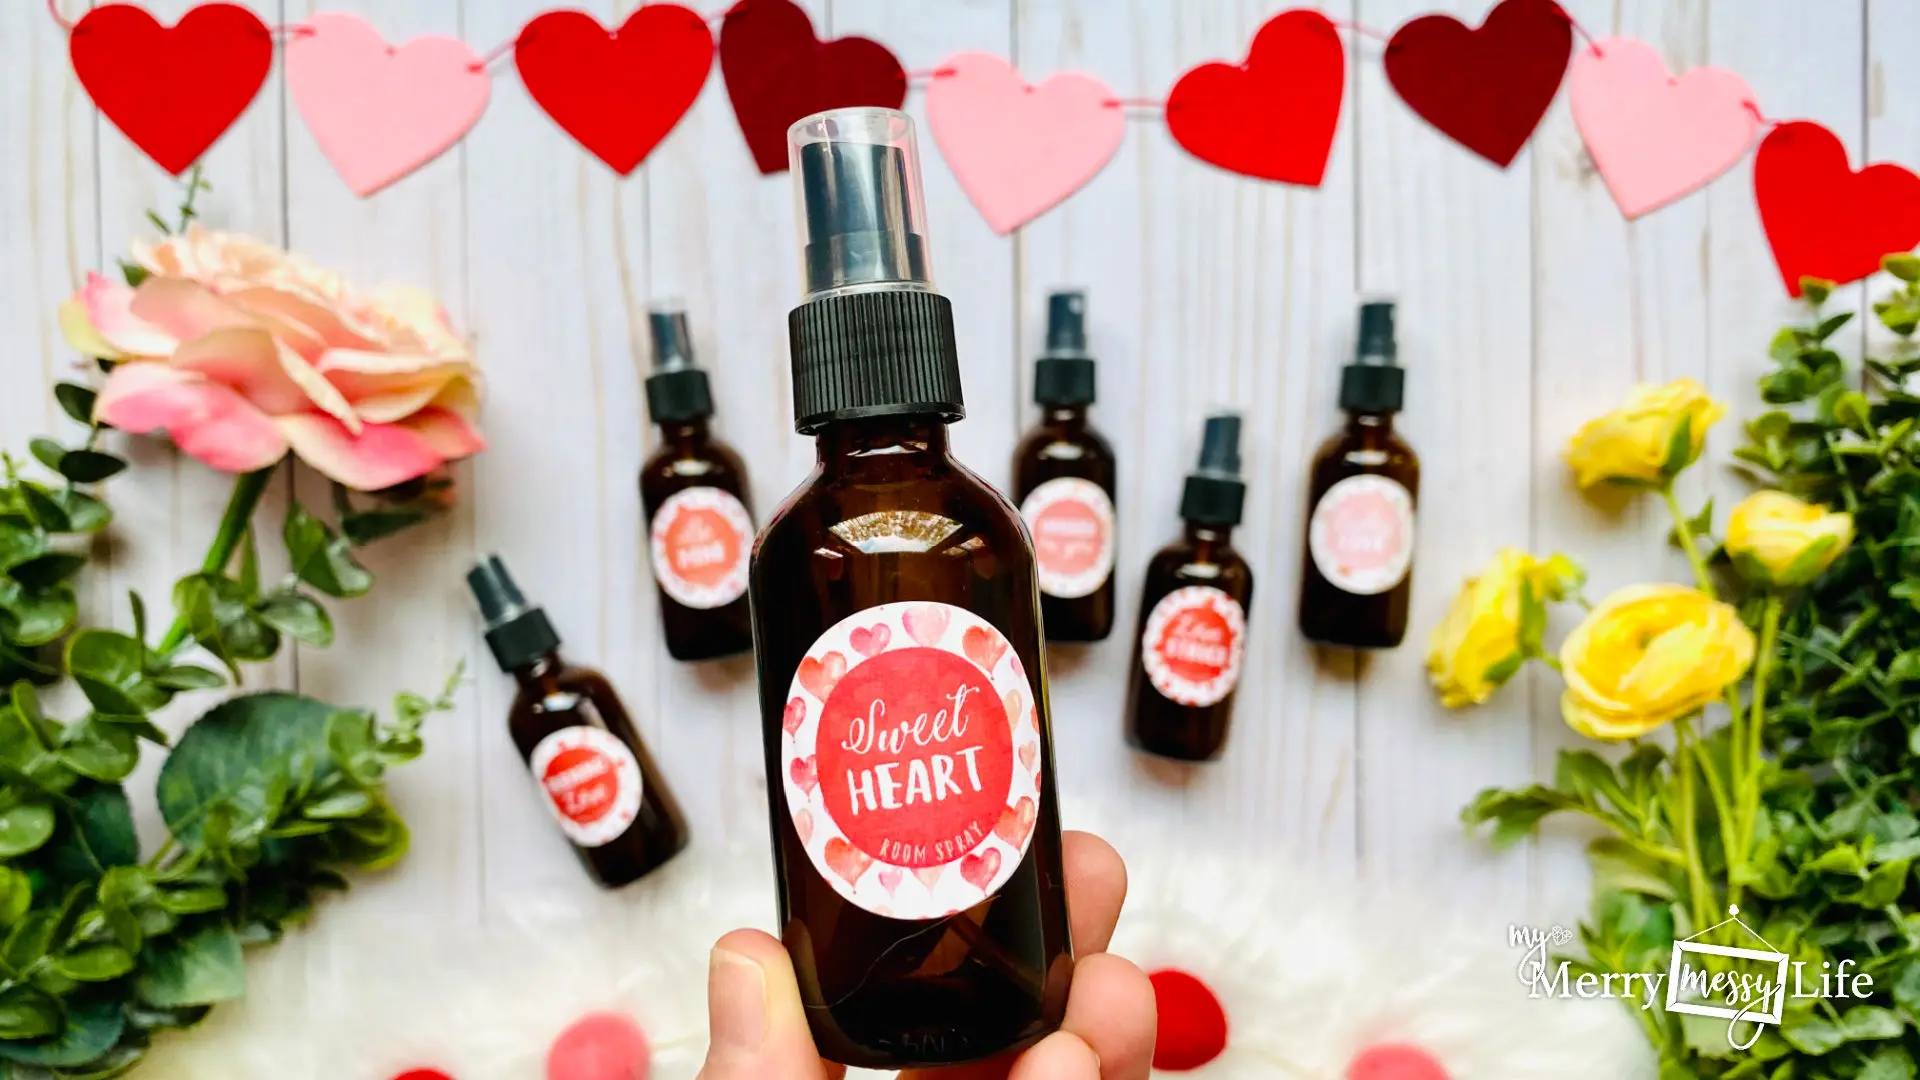 Sweet Heart Valentine's Day Room Spray Recipe using pure essential oils to make your home smell sweet and romantic without the toxins